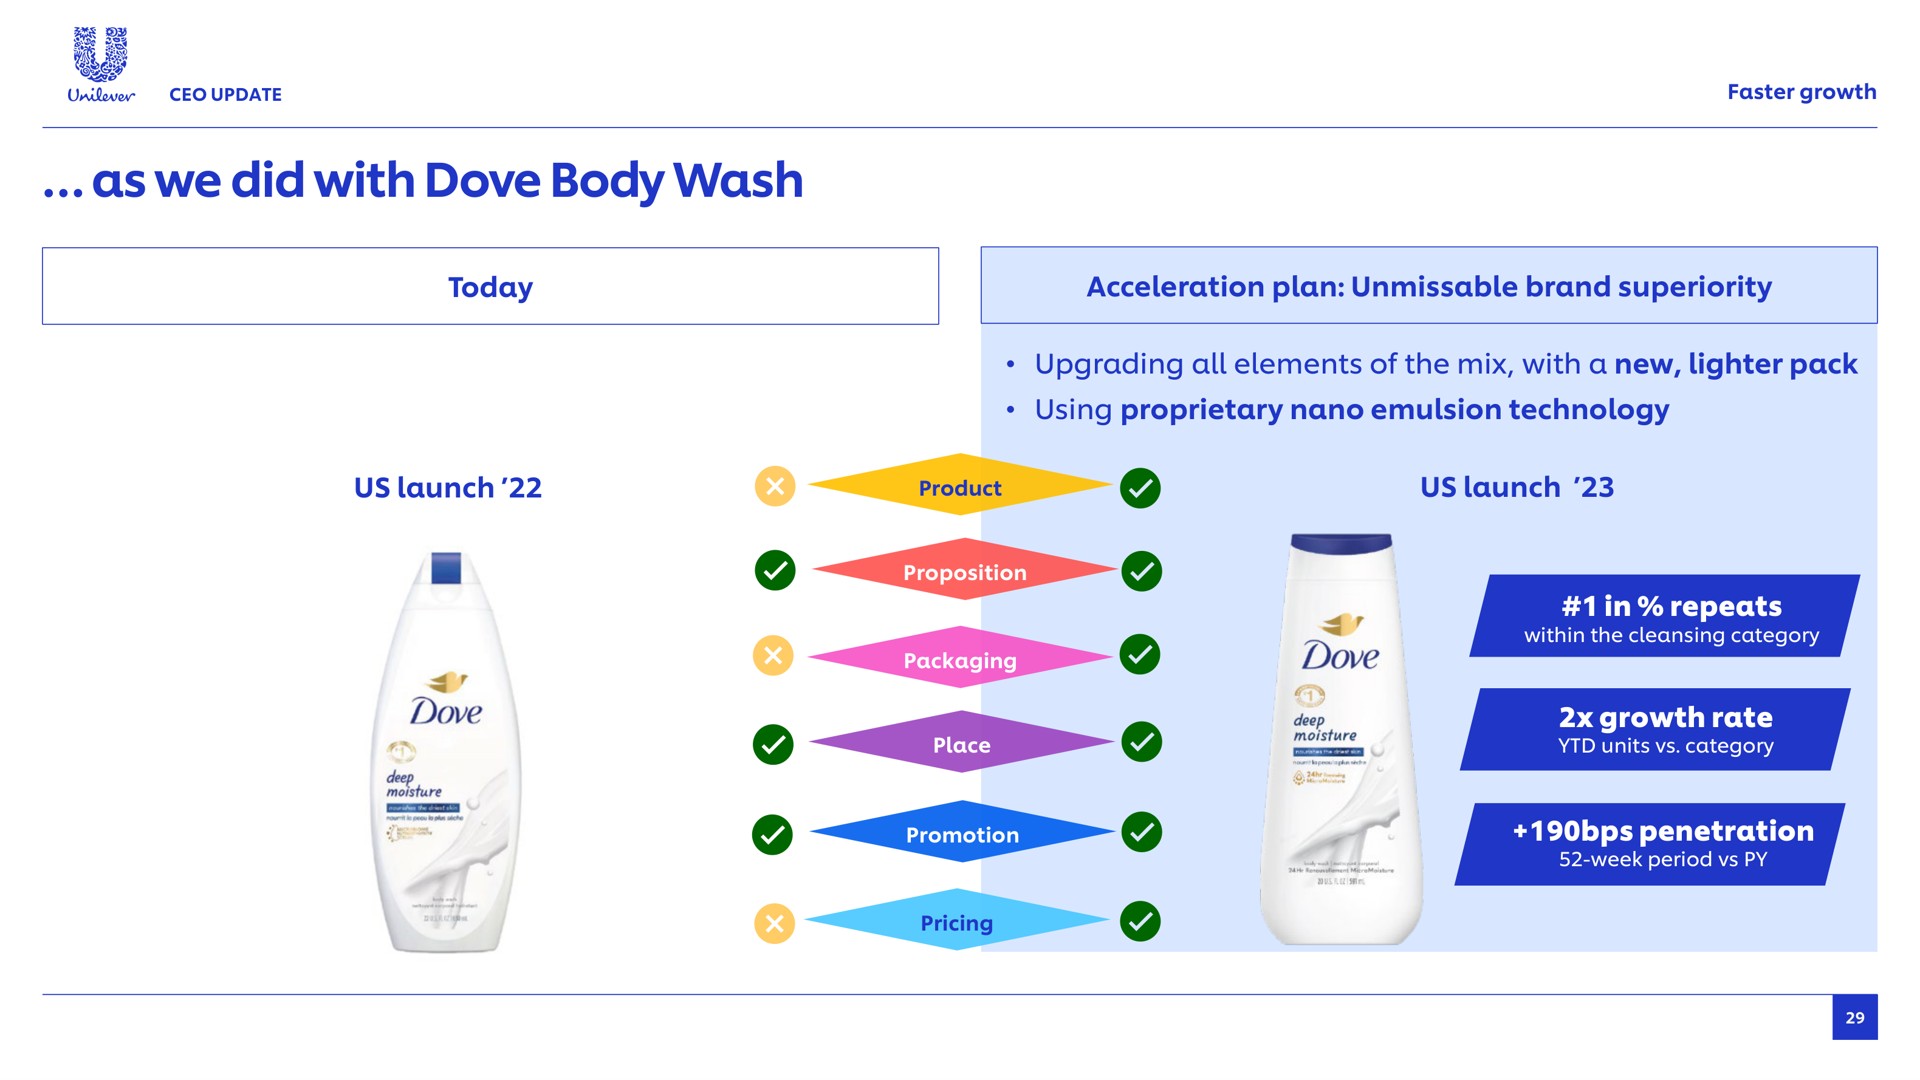 as we did with dove body wash faster growth today acceleration plan unmissable brand superiority upgrading all elements of the mix a new lighter pack using proprietary emulsion technology us launch product us launch i a pricing deep in repeats within the cleansing category penetration week period | Unilever